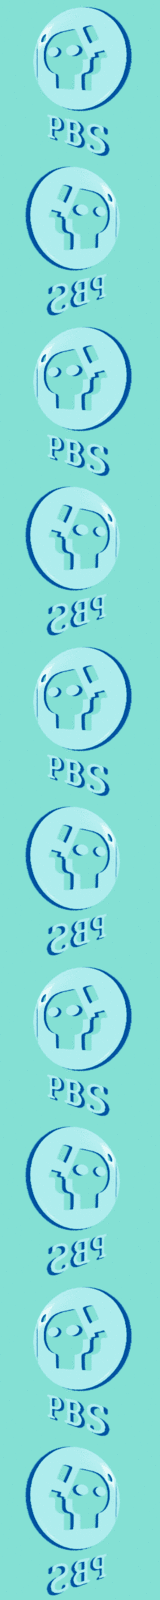 PBS BAGS collection image